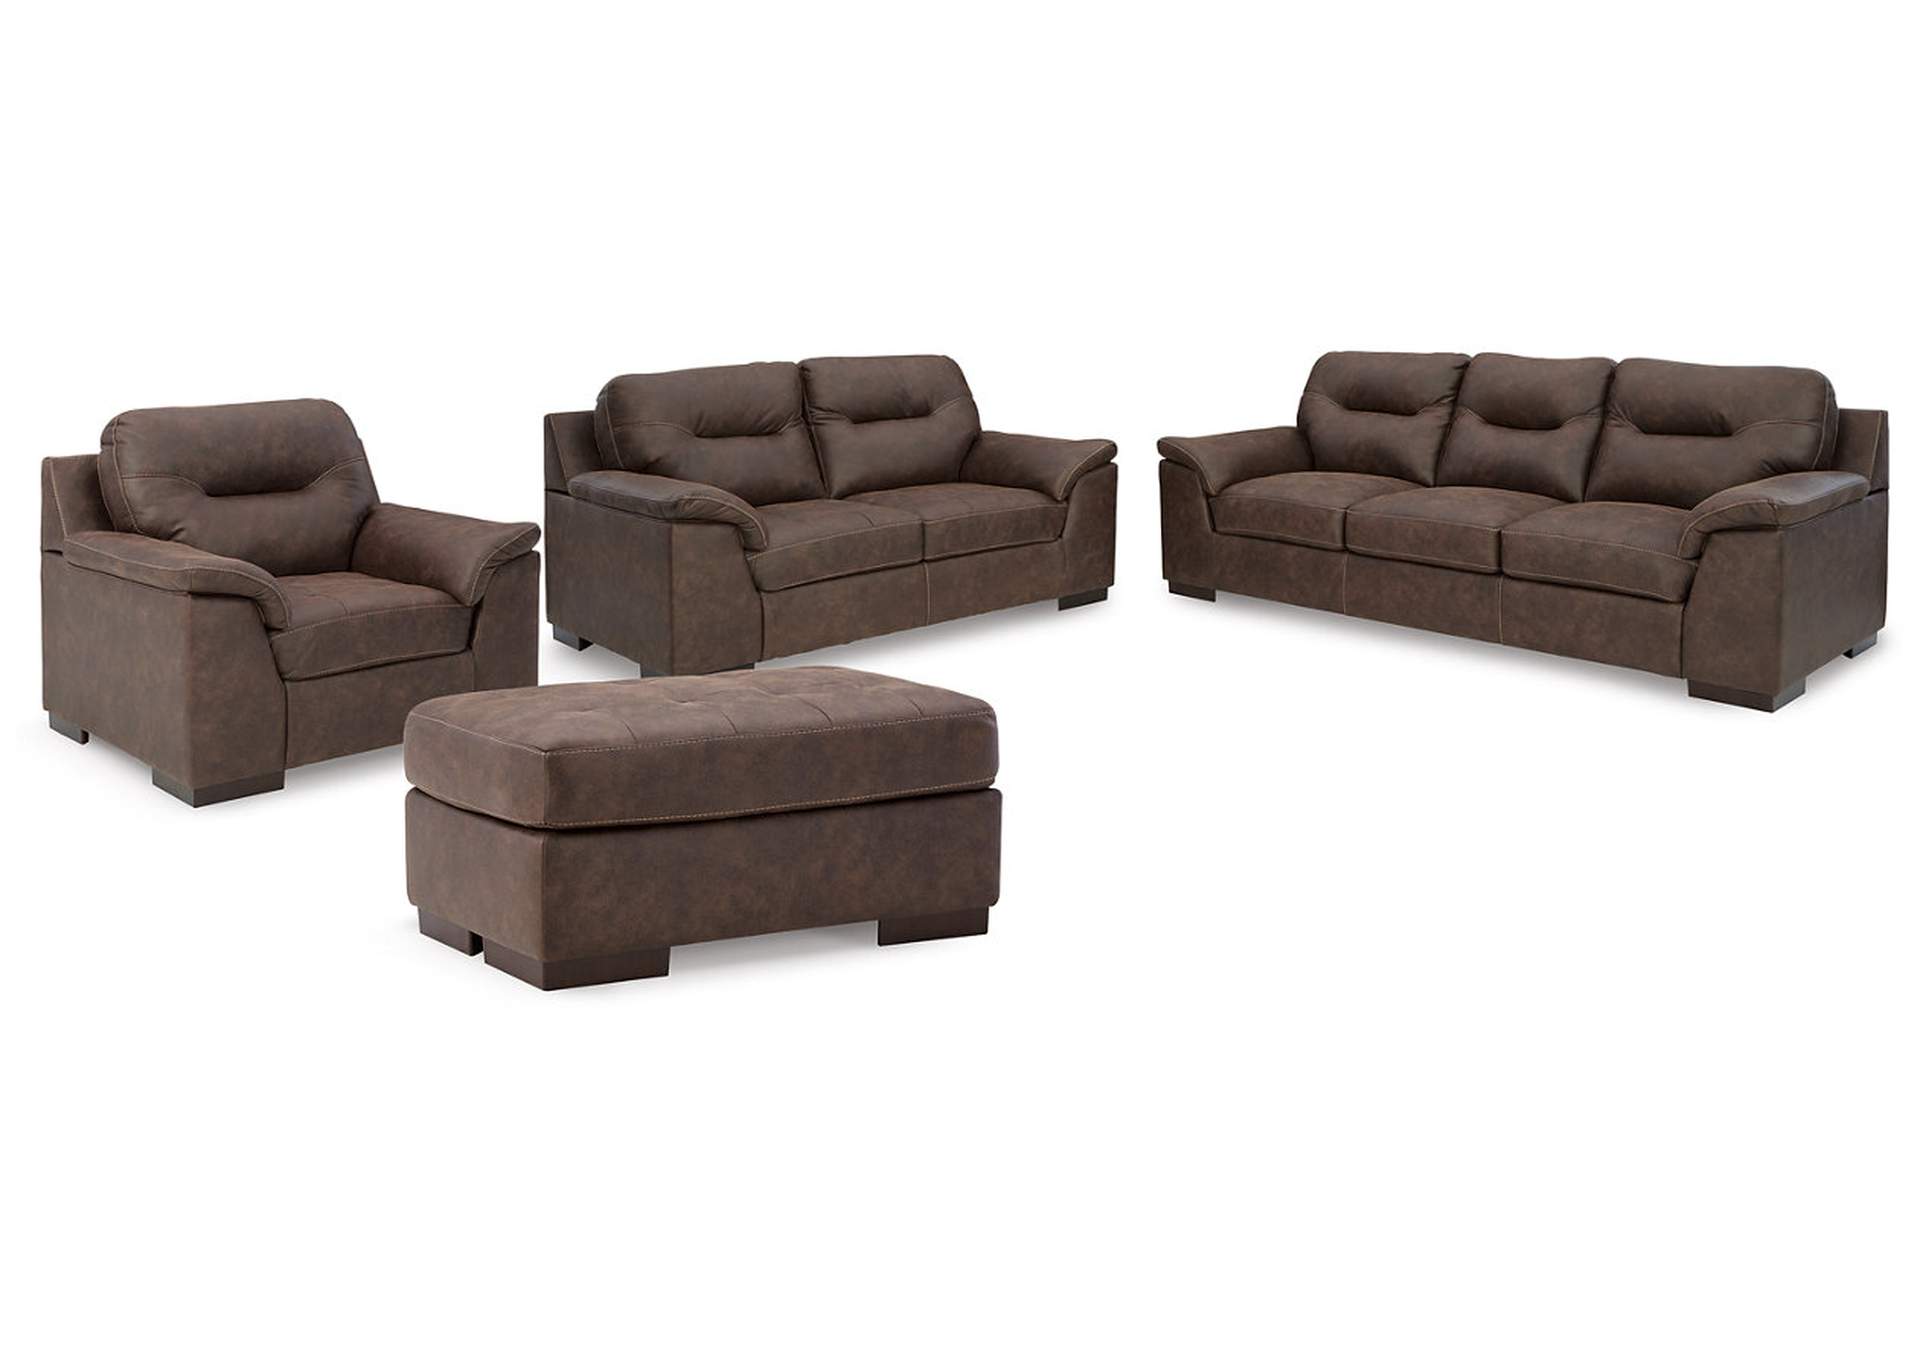 Sofa, Loveseat, Chair and Ottoman Ivan Smith Furniture